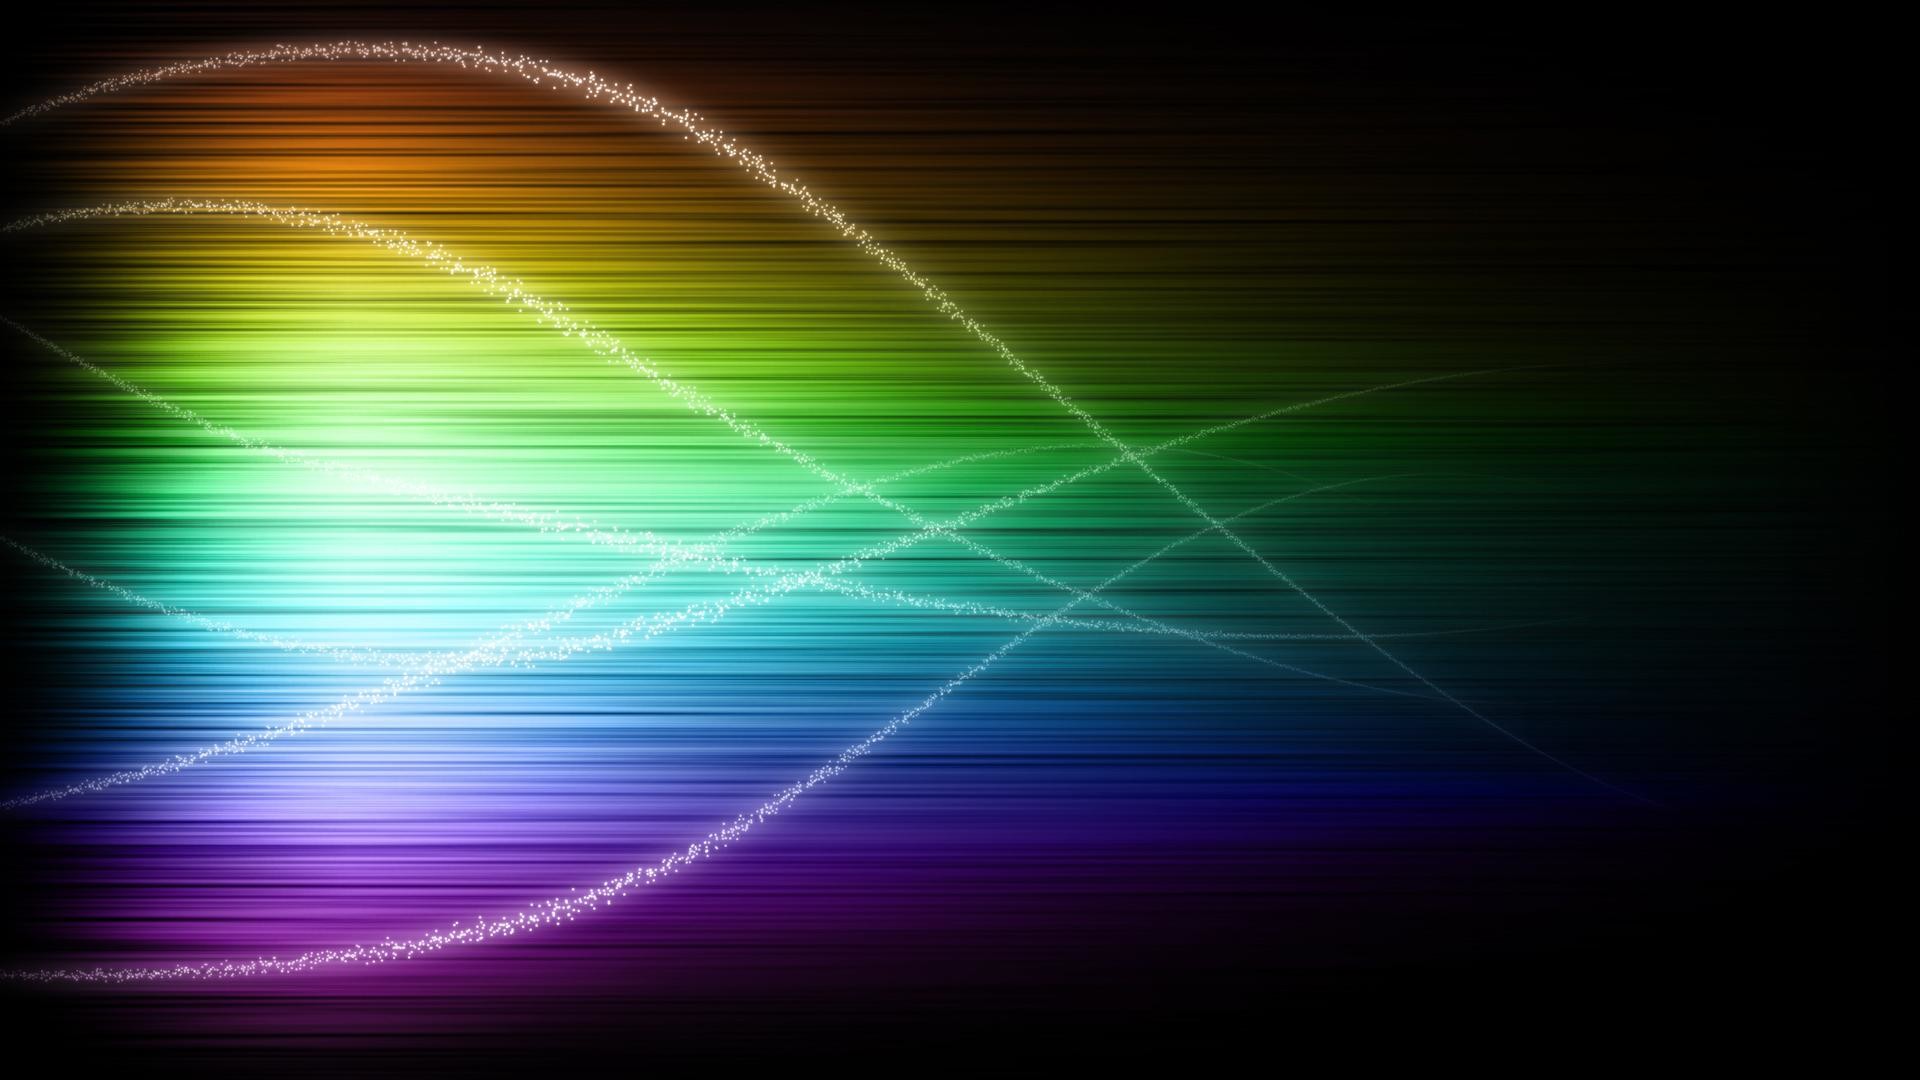 1920x1080  Cool dazzle glare line in black backgrounds wide wallpapers :1280x800,1440x900,1680x1050